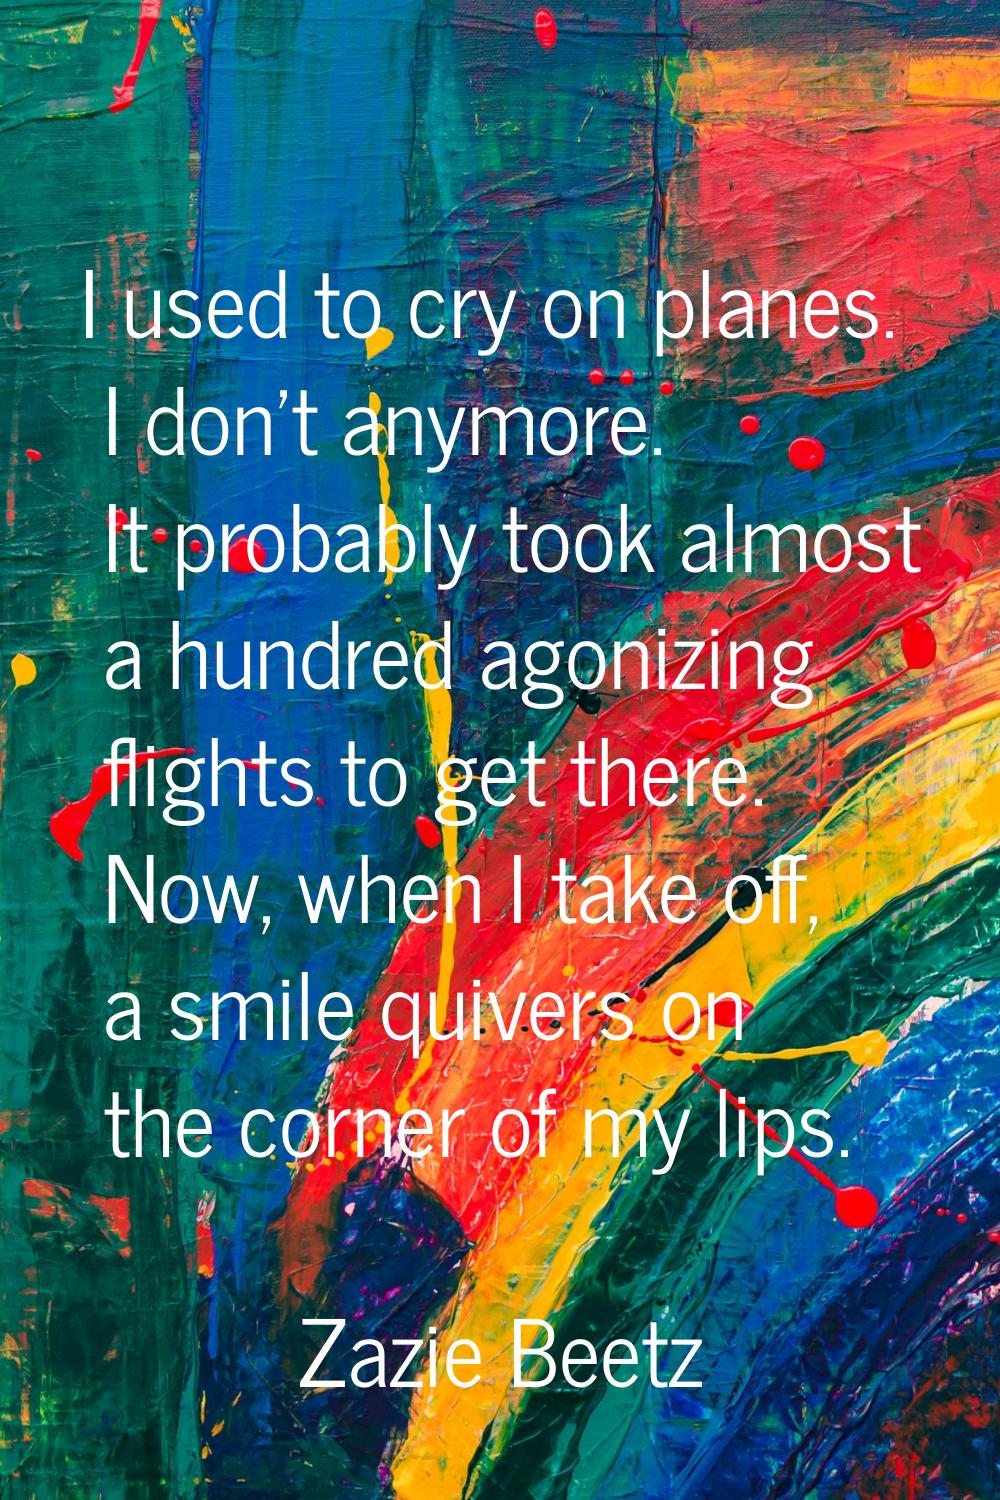 I used to cry on planes. I don't anymore. It probably took almost a hundred agonizing flights to ge